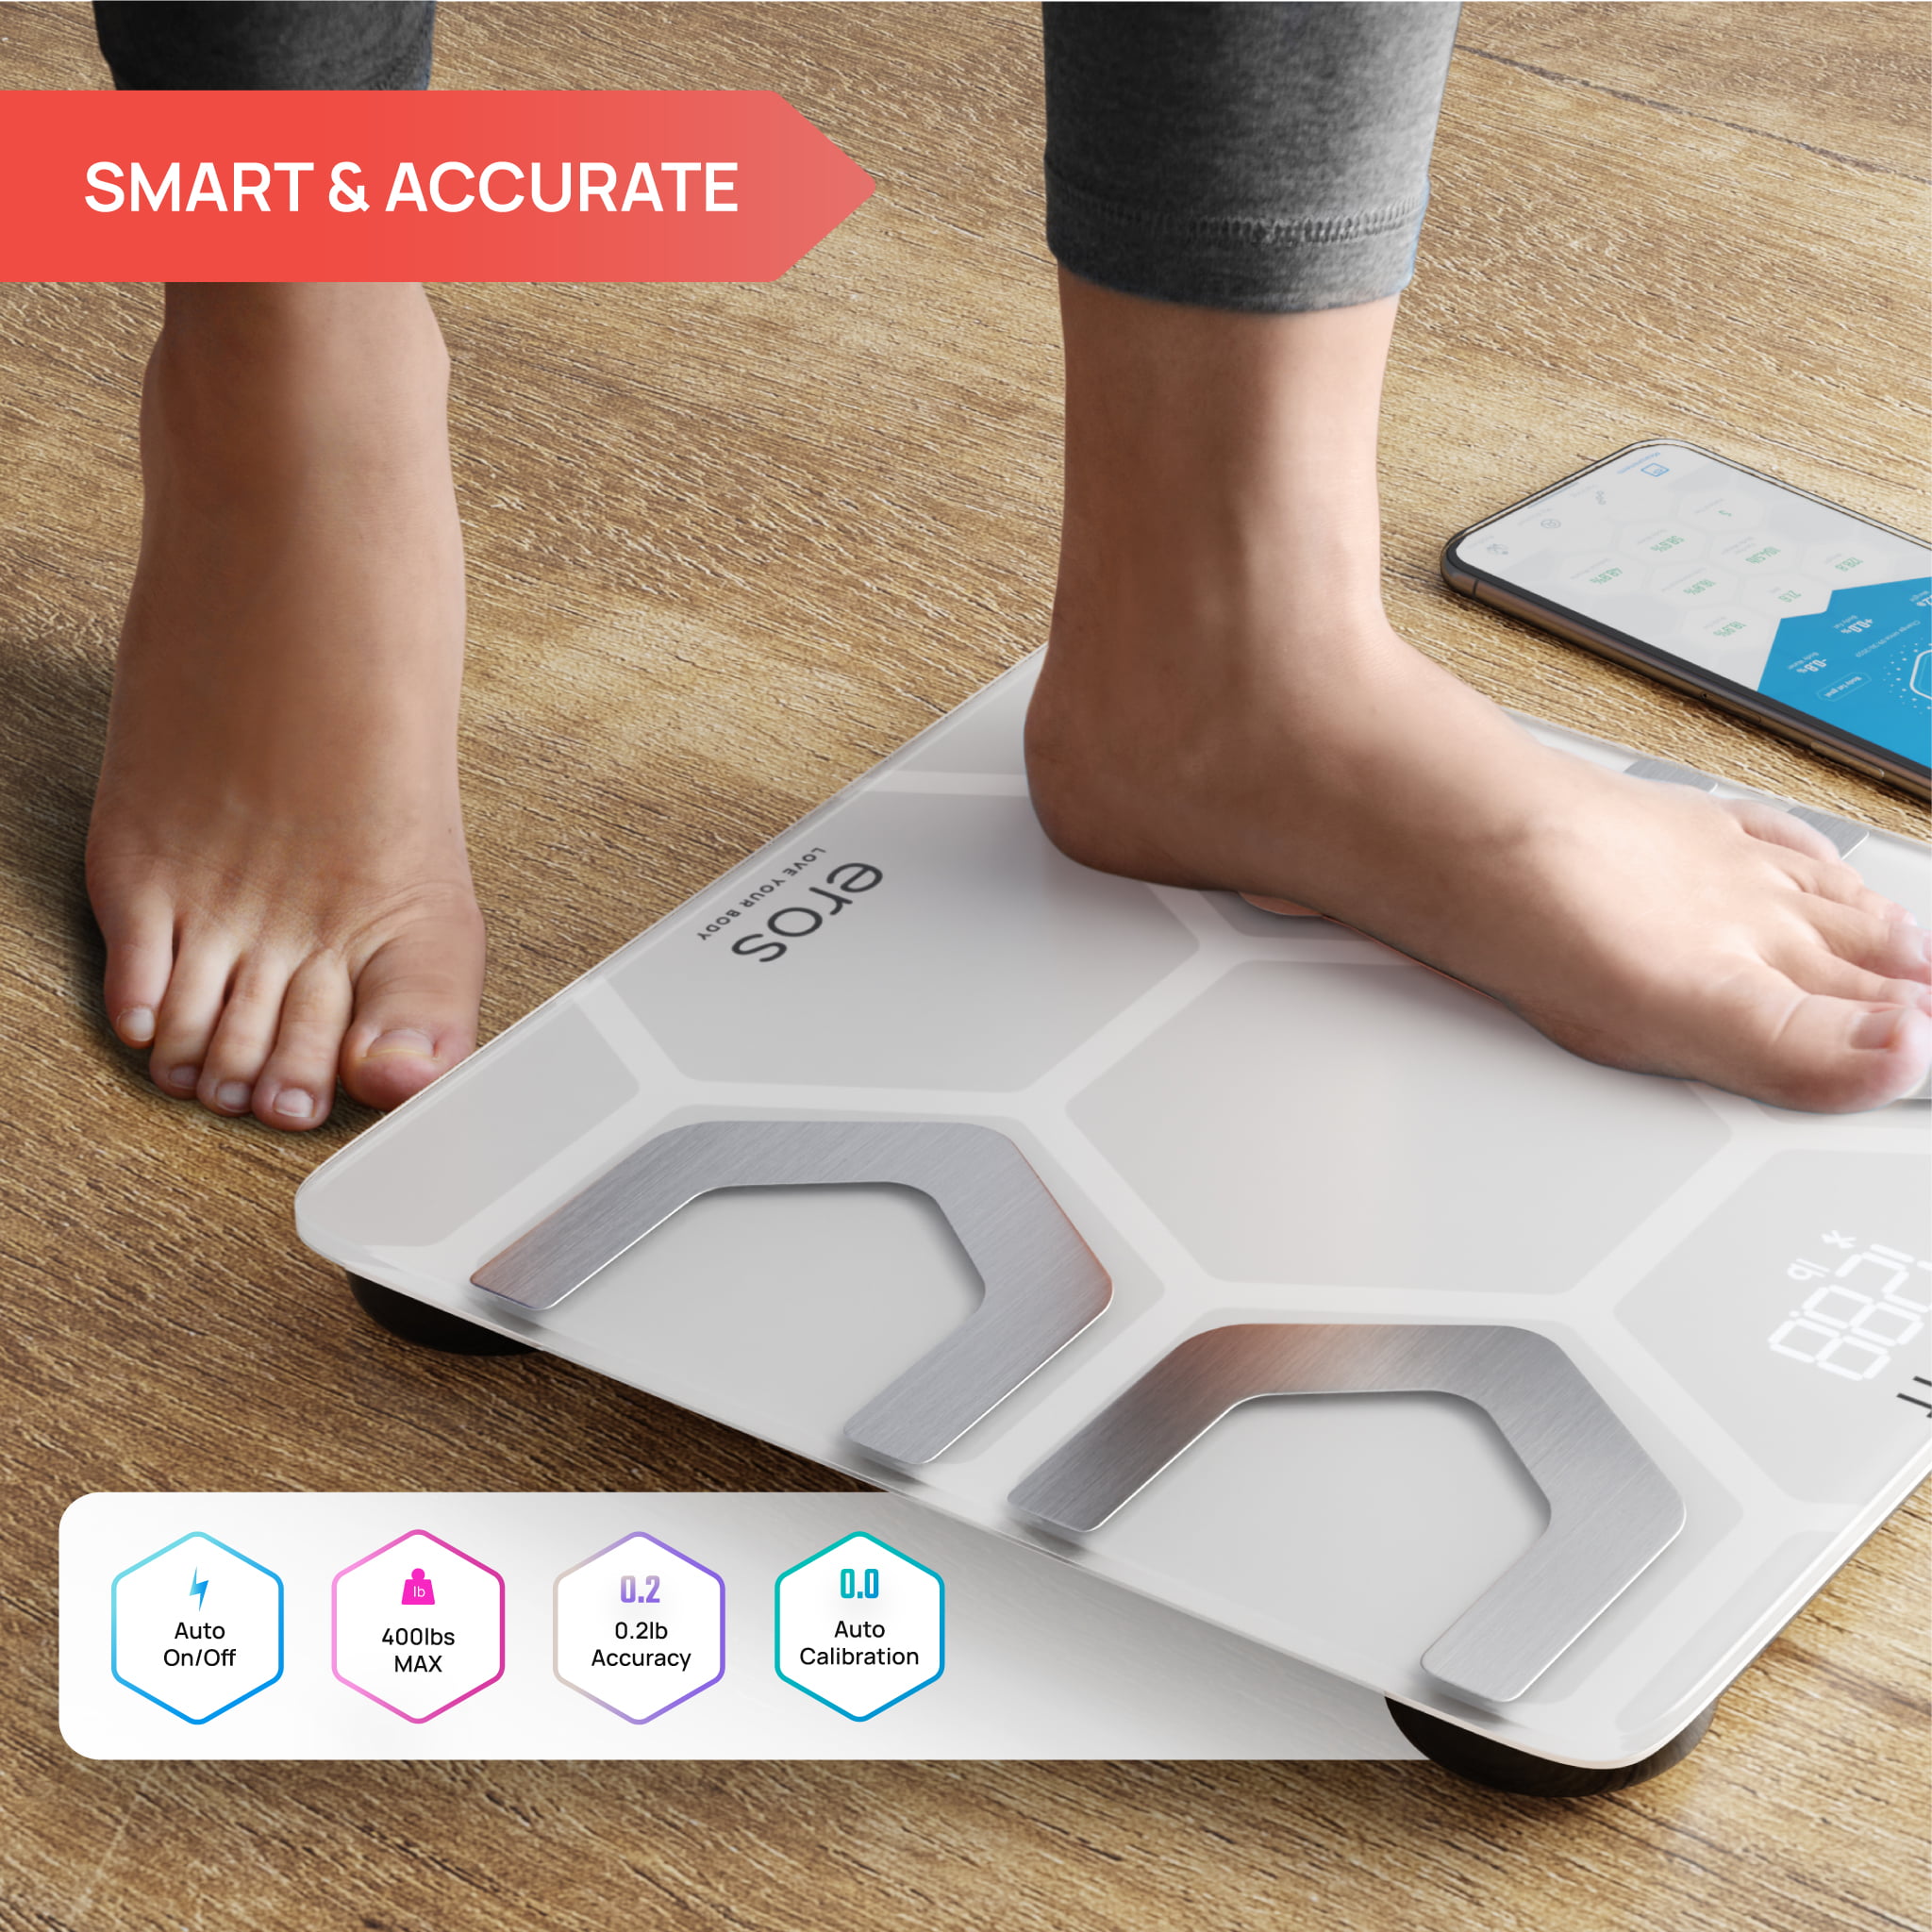 INEVIFIT EROS Smart Body Fat Scale Bluetooth Highly Accurate Digital, New  In Box